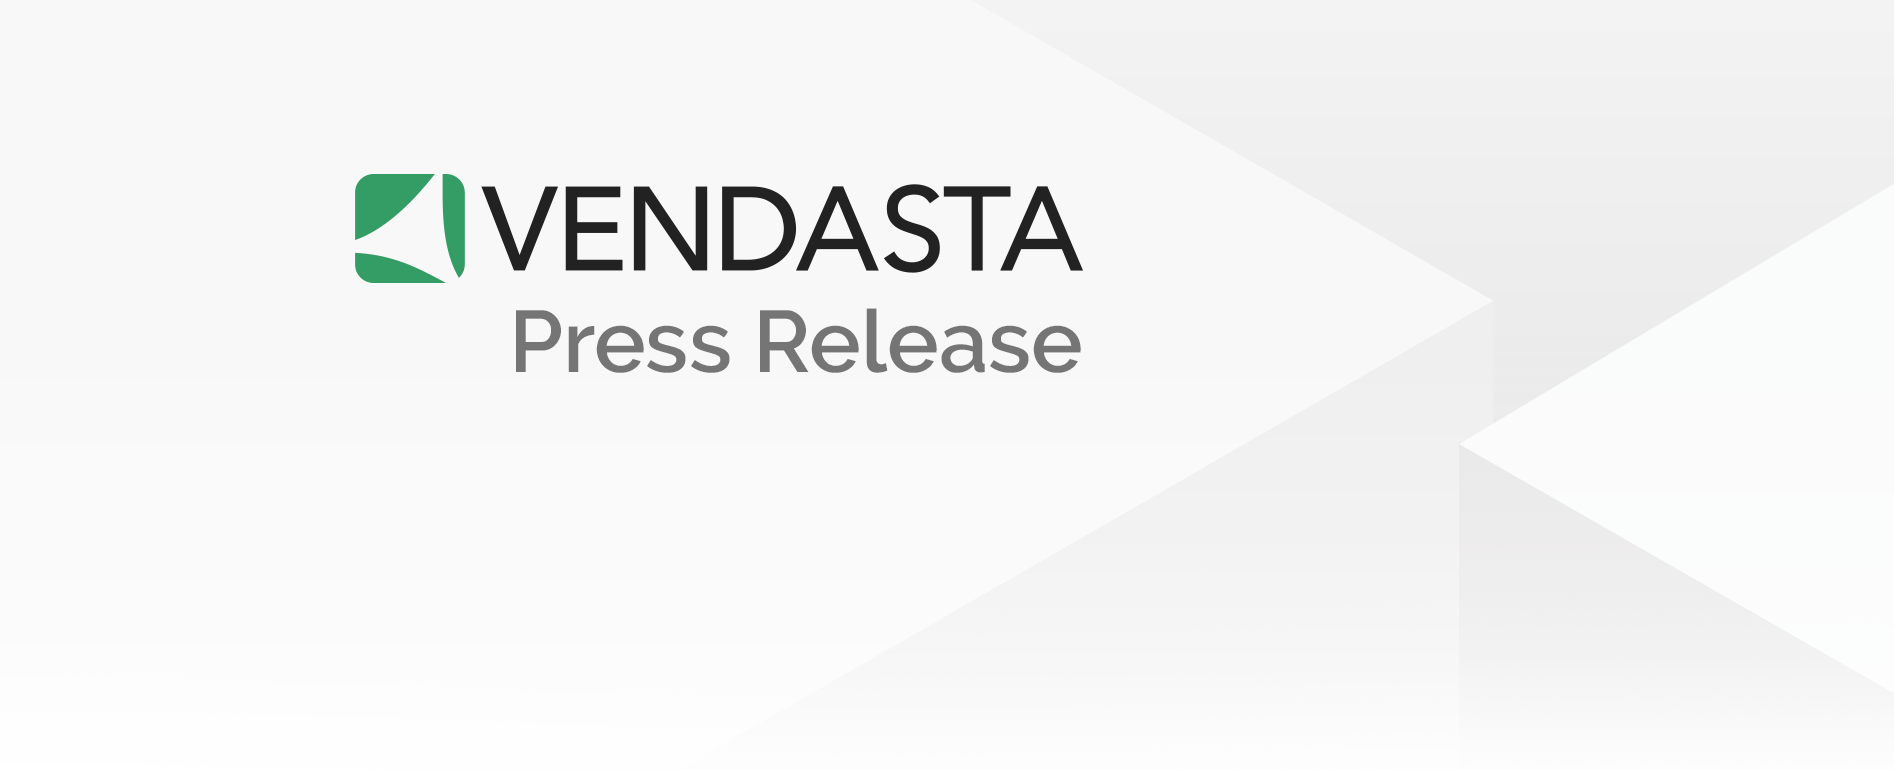 Vendasta named to Financial Times list of fastest growing companies